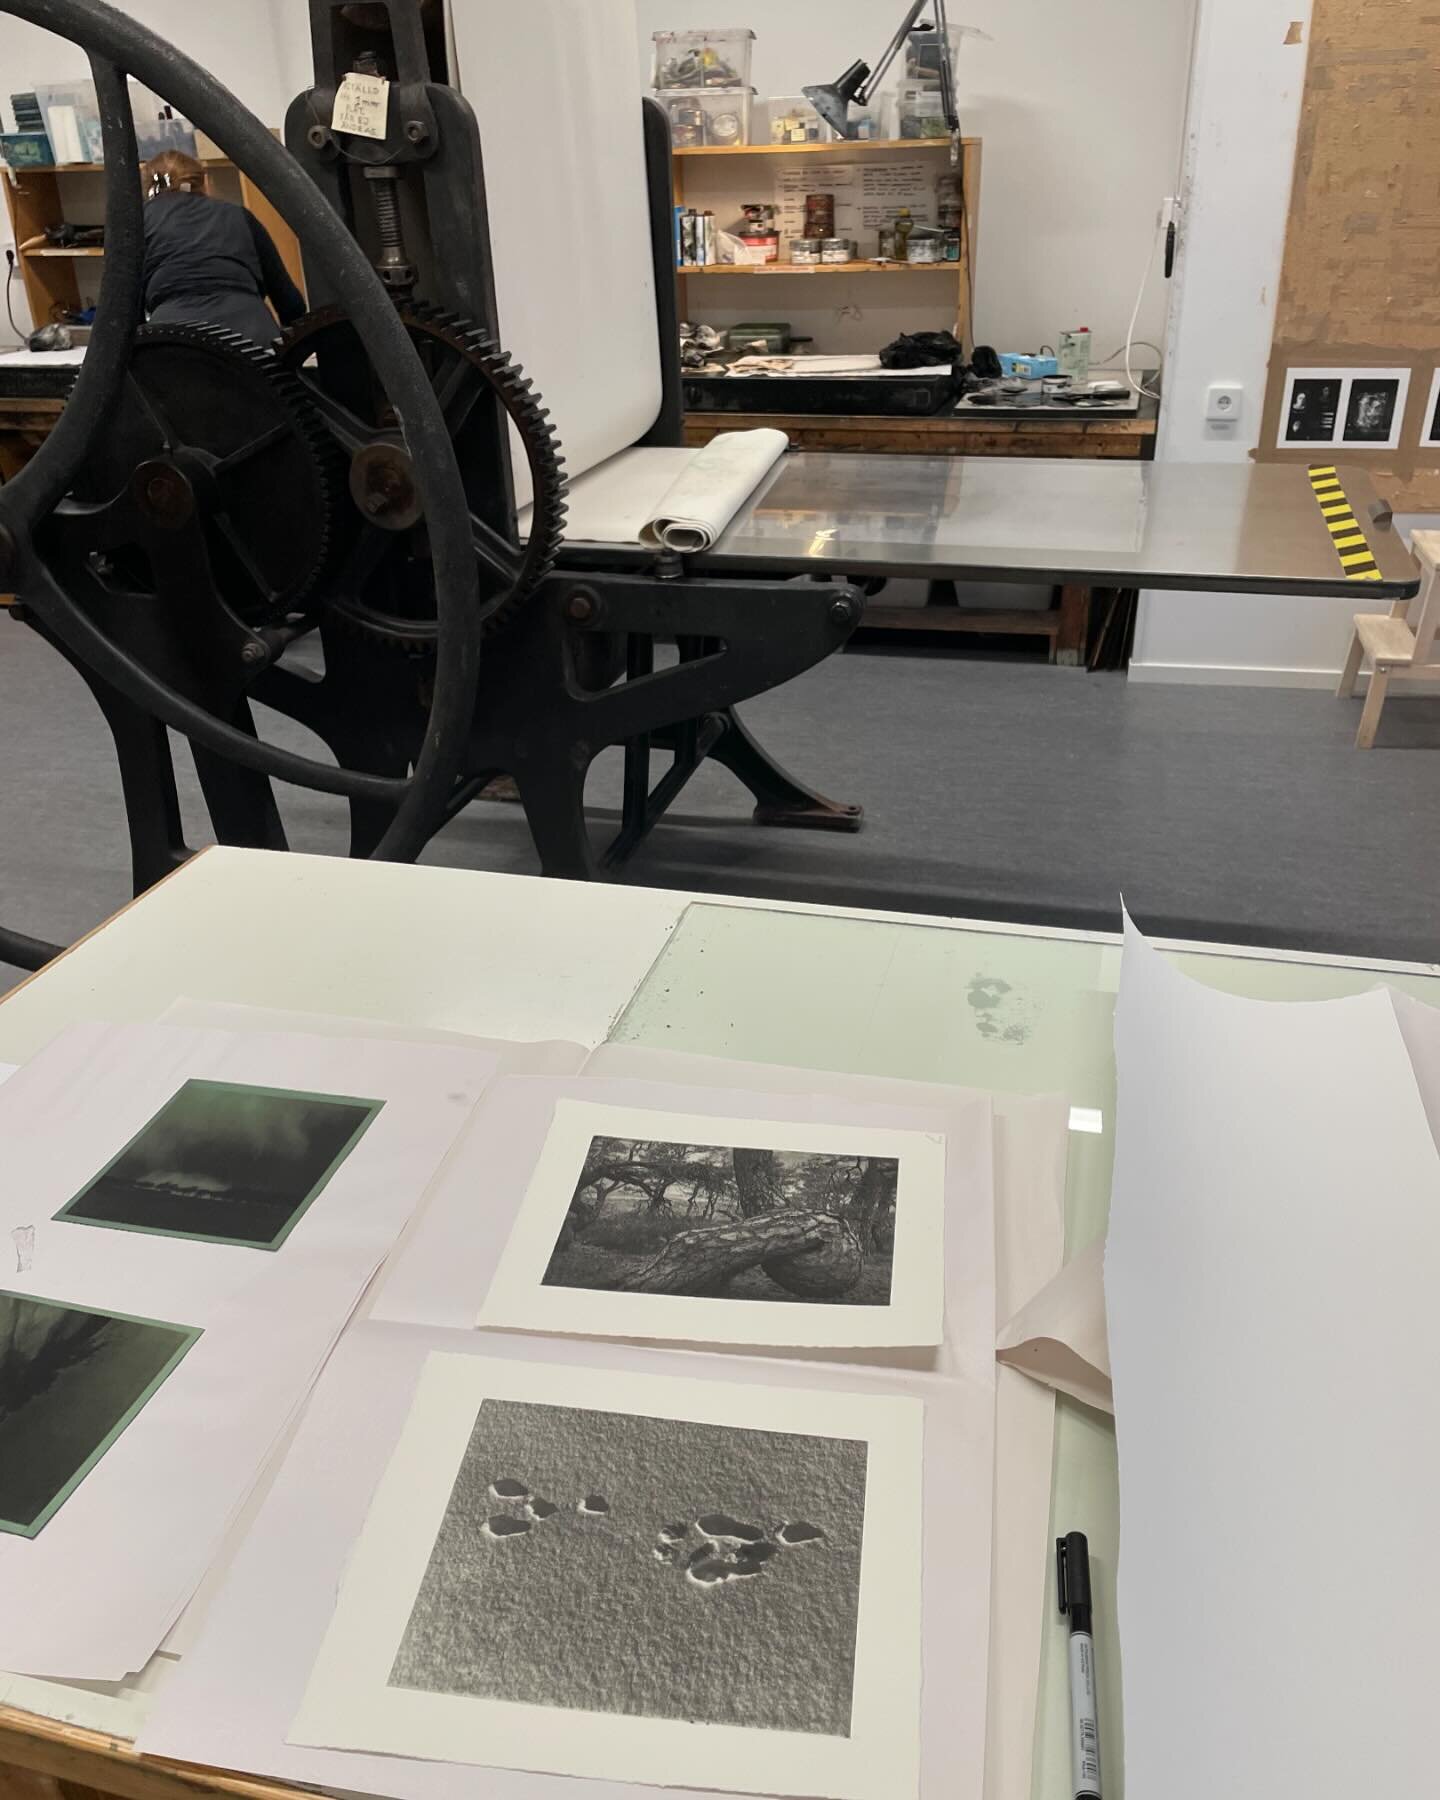 So cool with course in photopolymer this weekend. Thanks to @ninakerolaarts for refilling of knowledge and inspiration! 
.
#photopolymer #kkvgrafik #grafik #grafikk #printing #print #printmaking #printmakingart #printmaker #intaglioprintmaking #intag